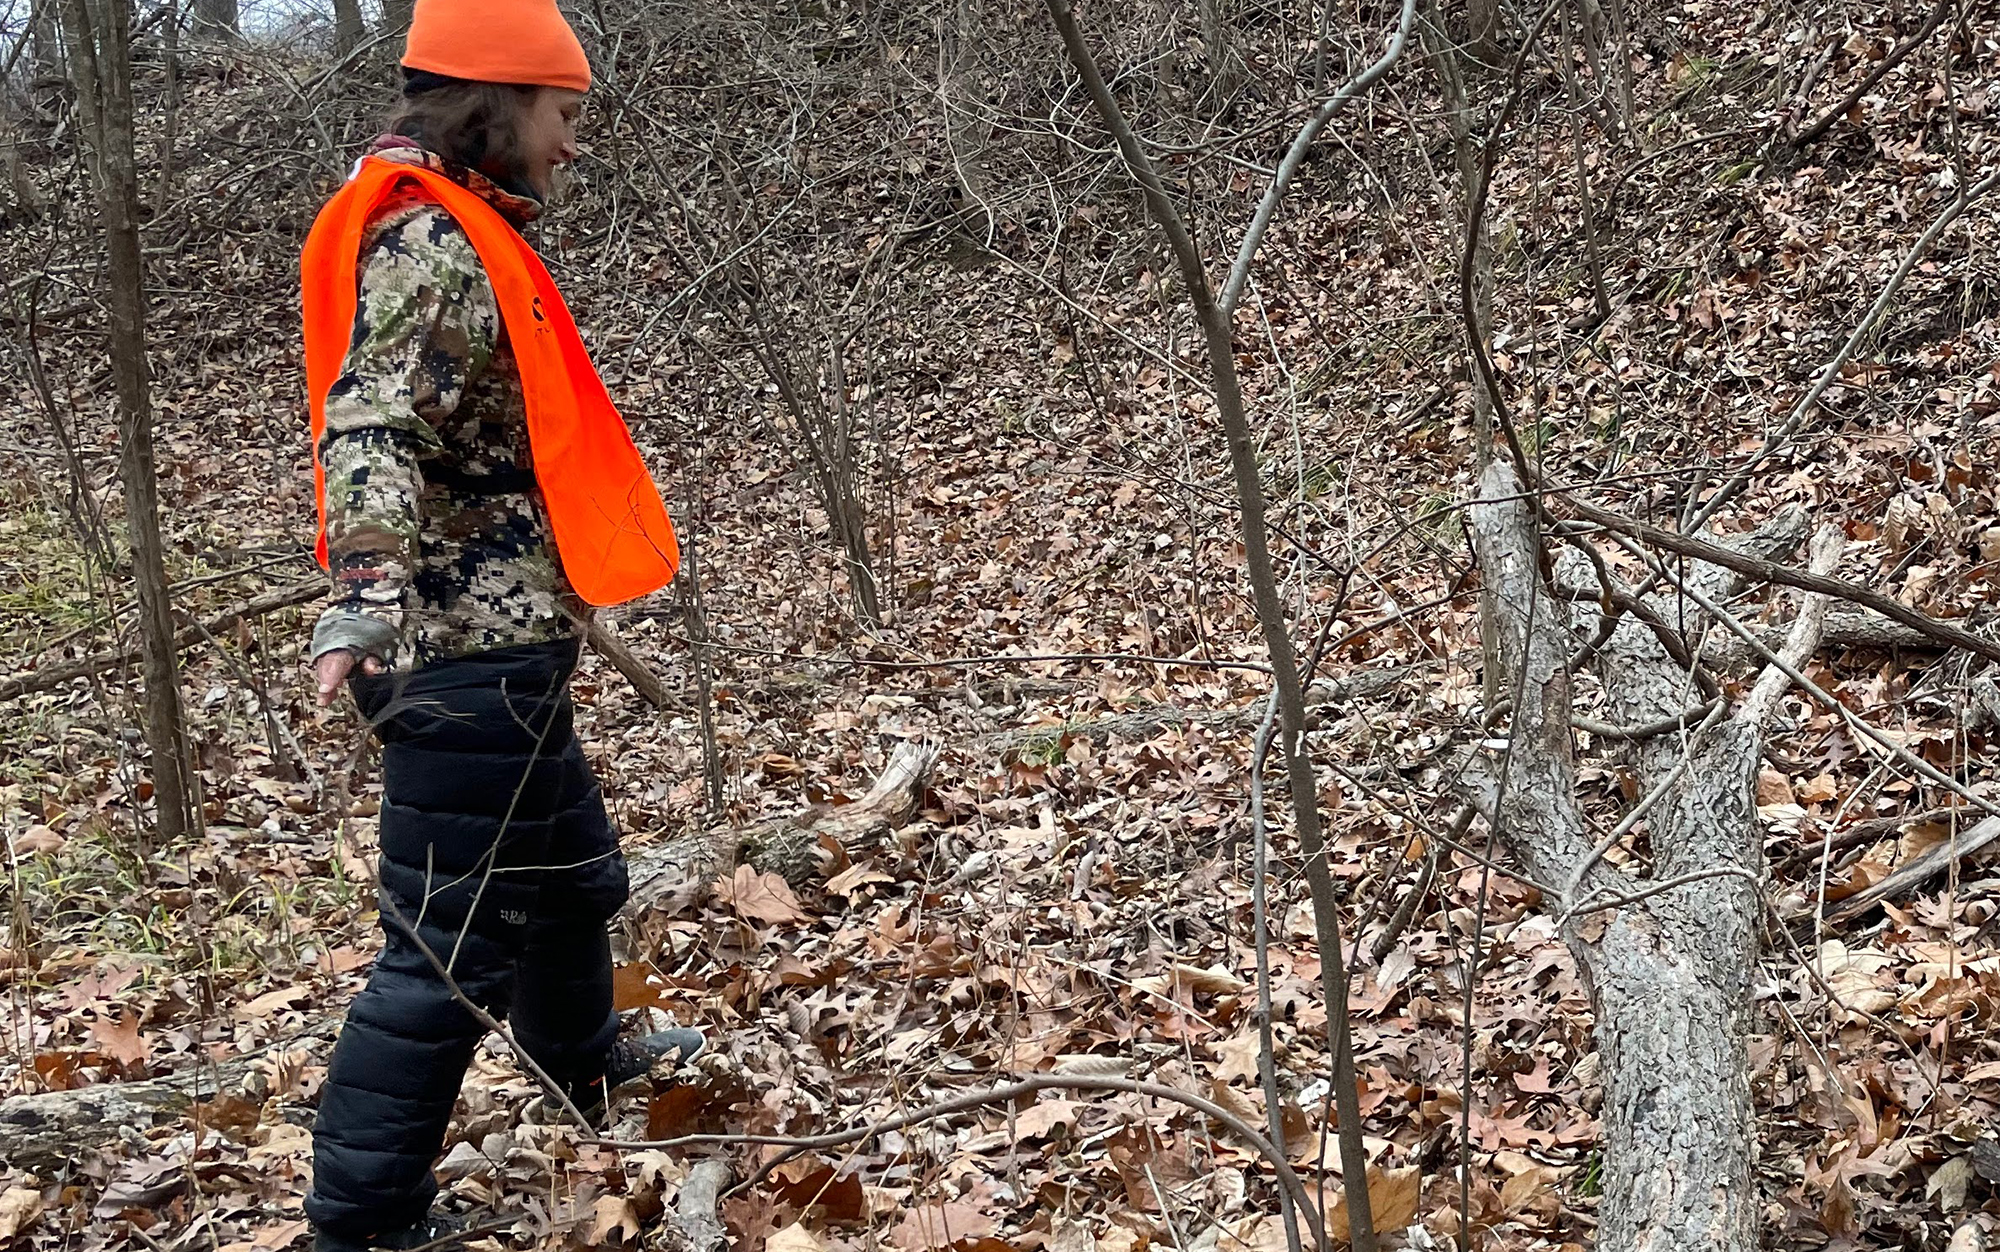 The Rab Argon Down Pants kept my legs warm for a full morning of early winter deer hunting in Missouri.